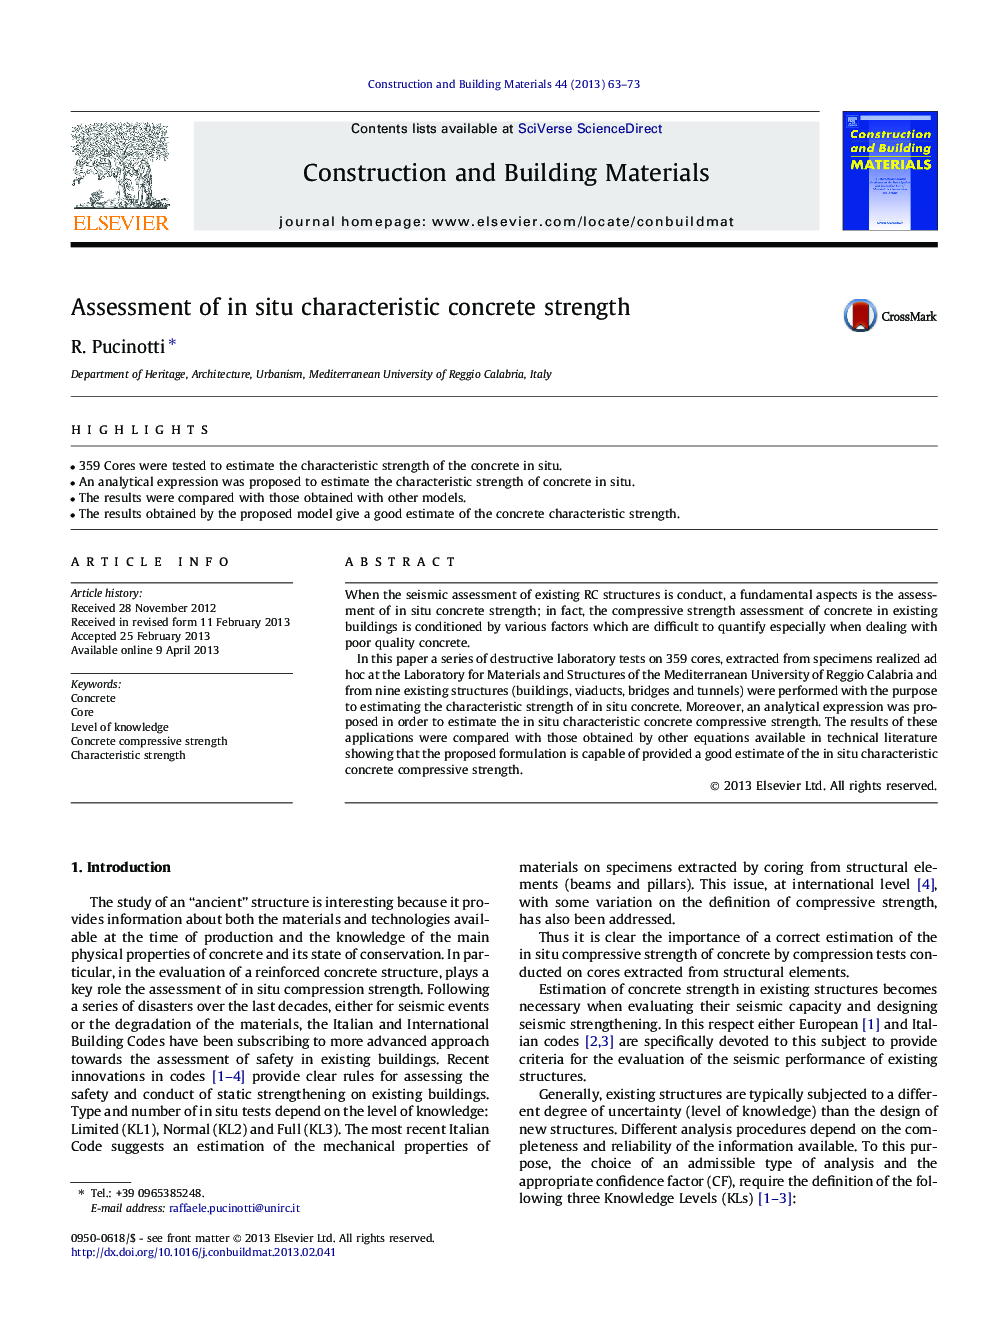 Assessment of in situ characteristic concrete strength